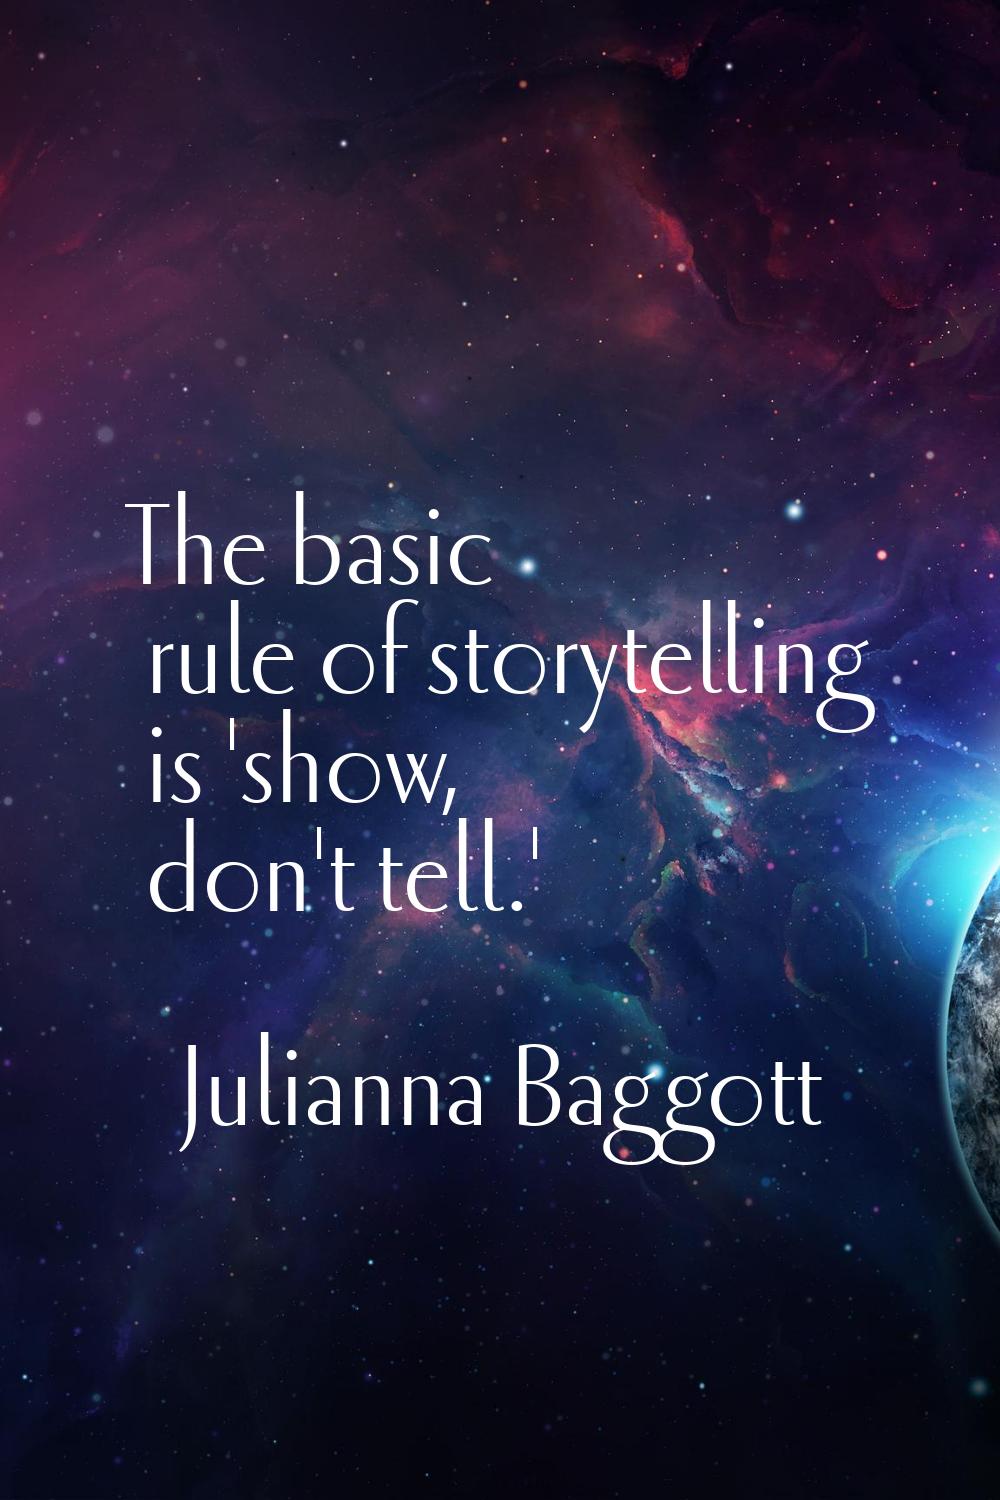 The basic rule of storytelling is 'show, don't tell.'